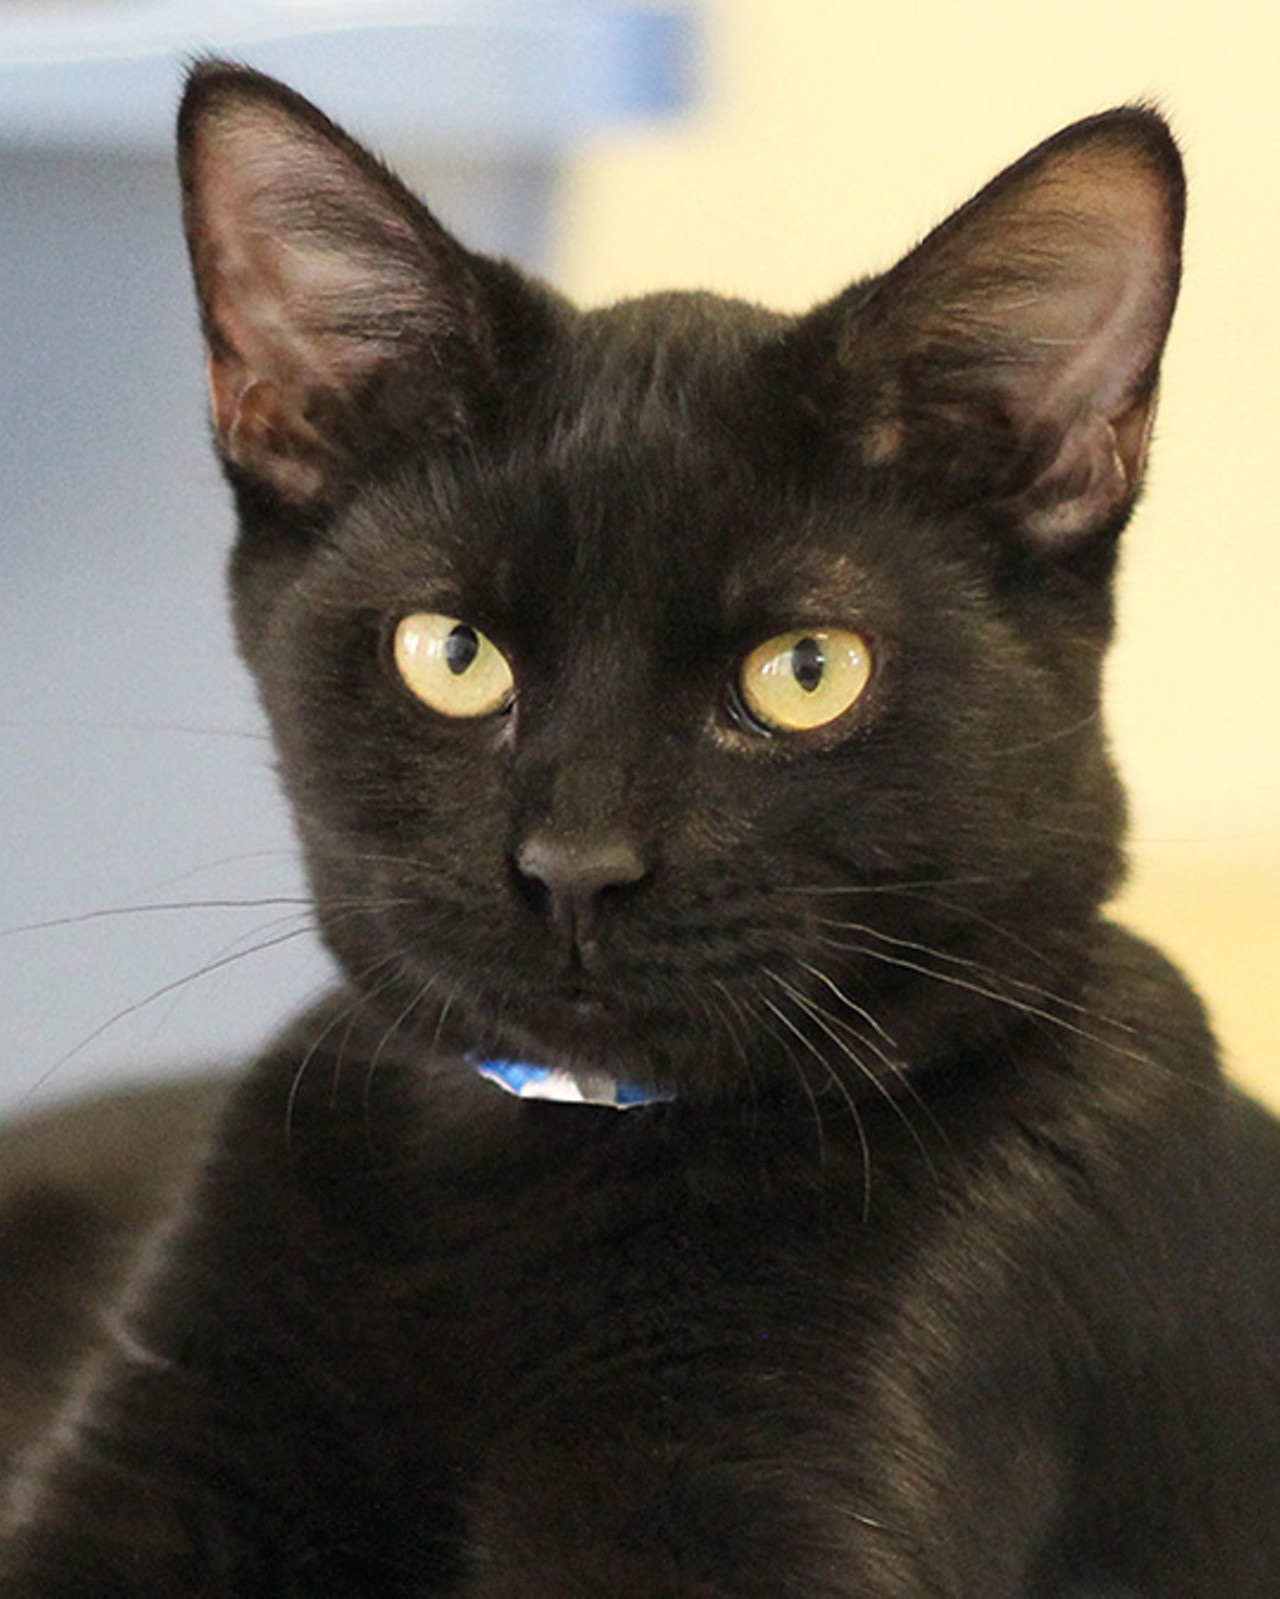 Kevin
"Aren&#146;t I a handsome boy? I&#146;m a young kitty, so I&#146;m full of energy. I&#146;m playful and enjoy having cat toys around to keep my curious mind occupied. I&#146;m looking for a home where I can cuddle up next to my best friend. Please visit me so we can find out if we can be forever friends."